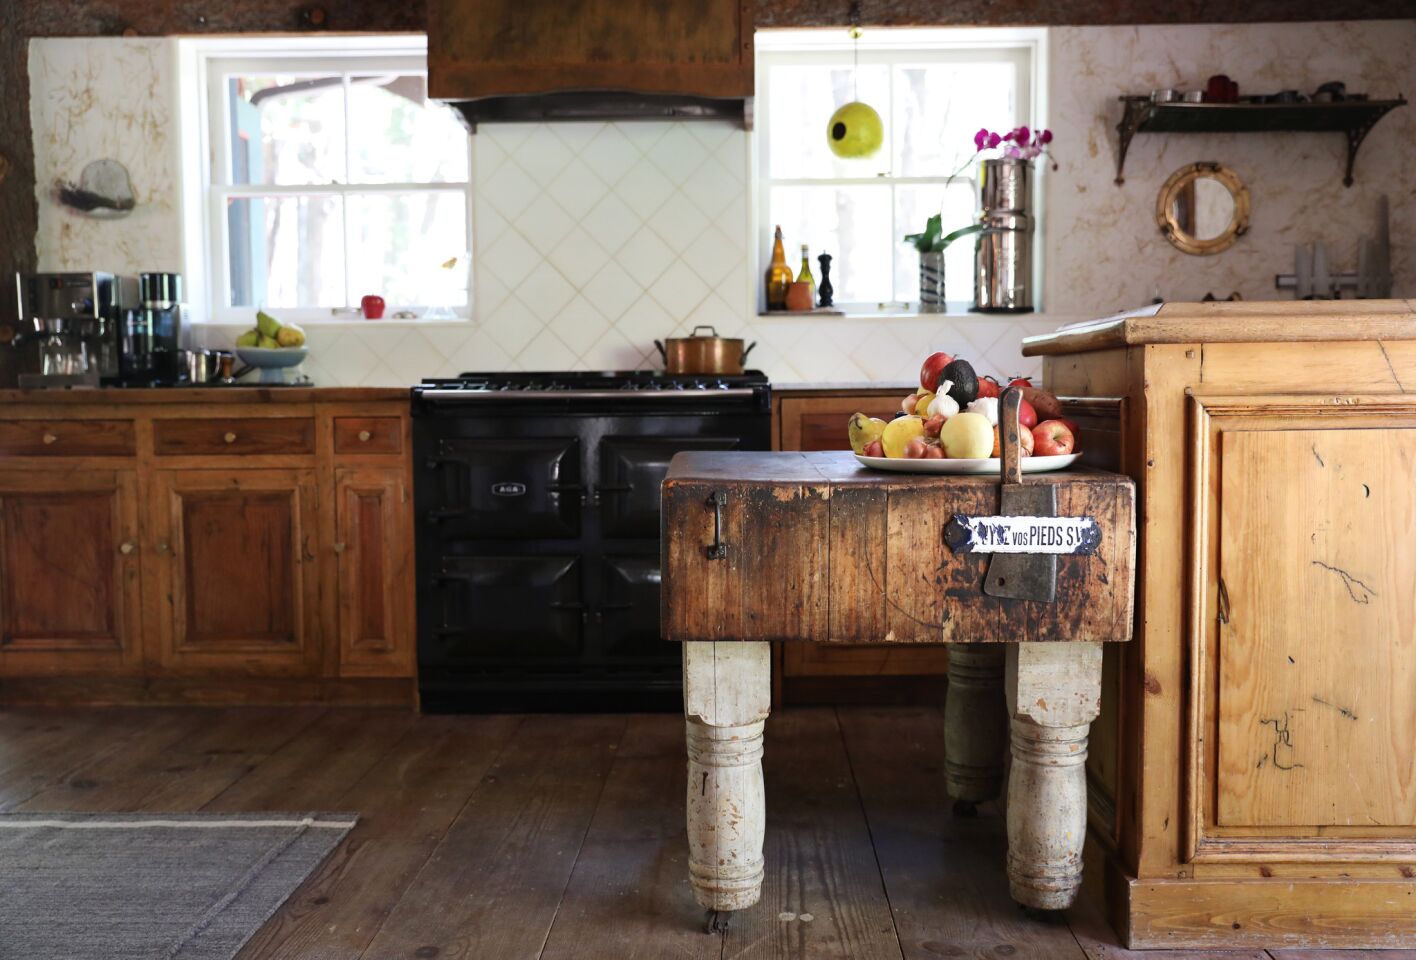 A butcher block-counter came from the former Silver Lake home of artist Pauline Annon